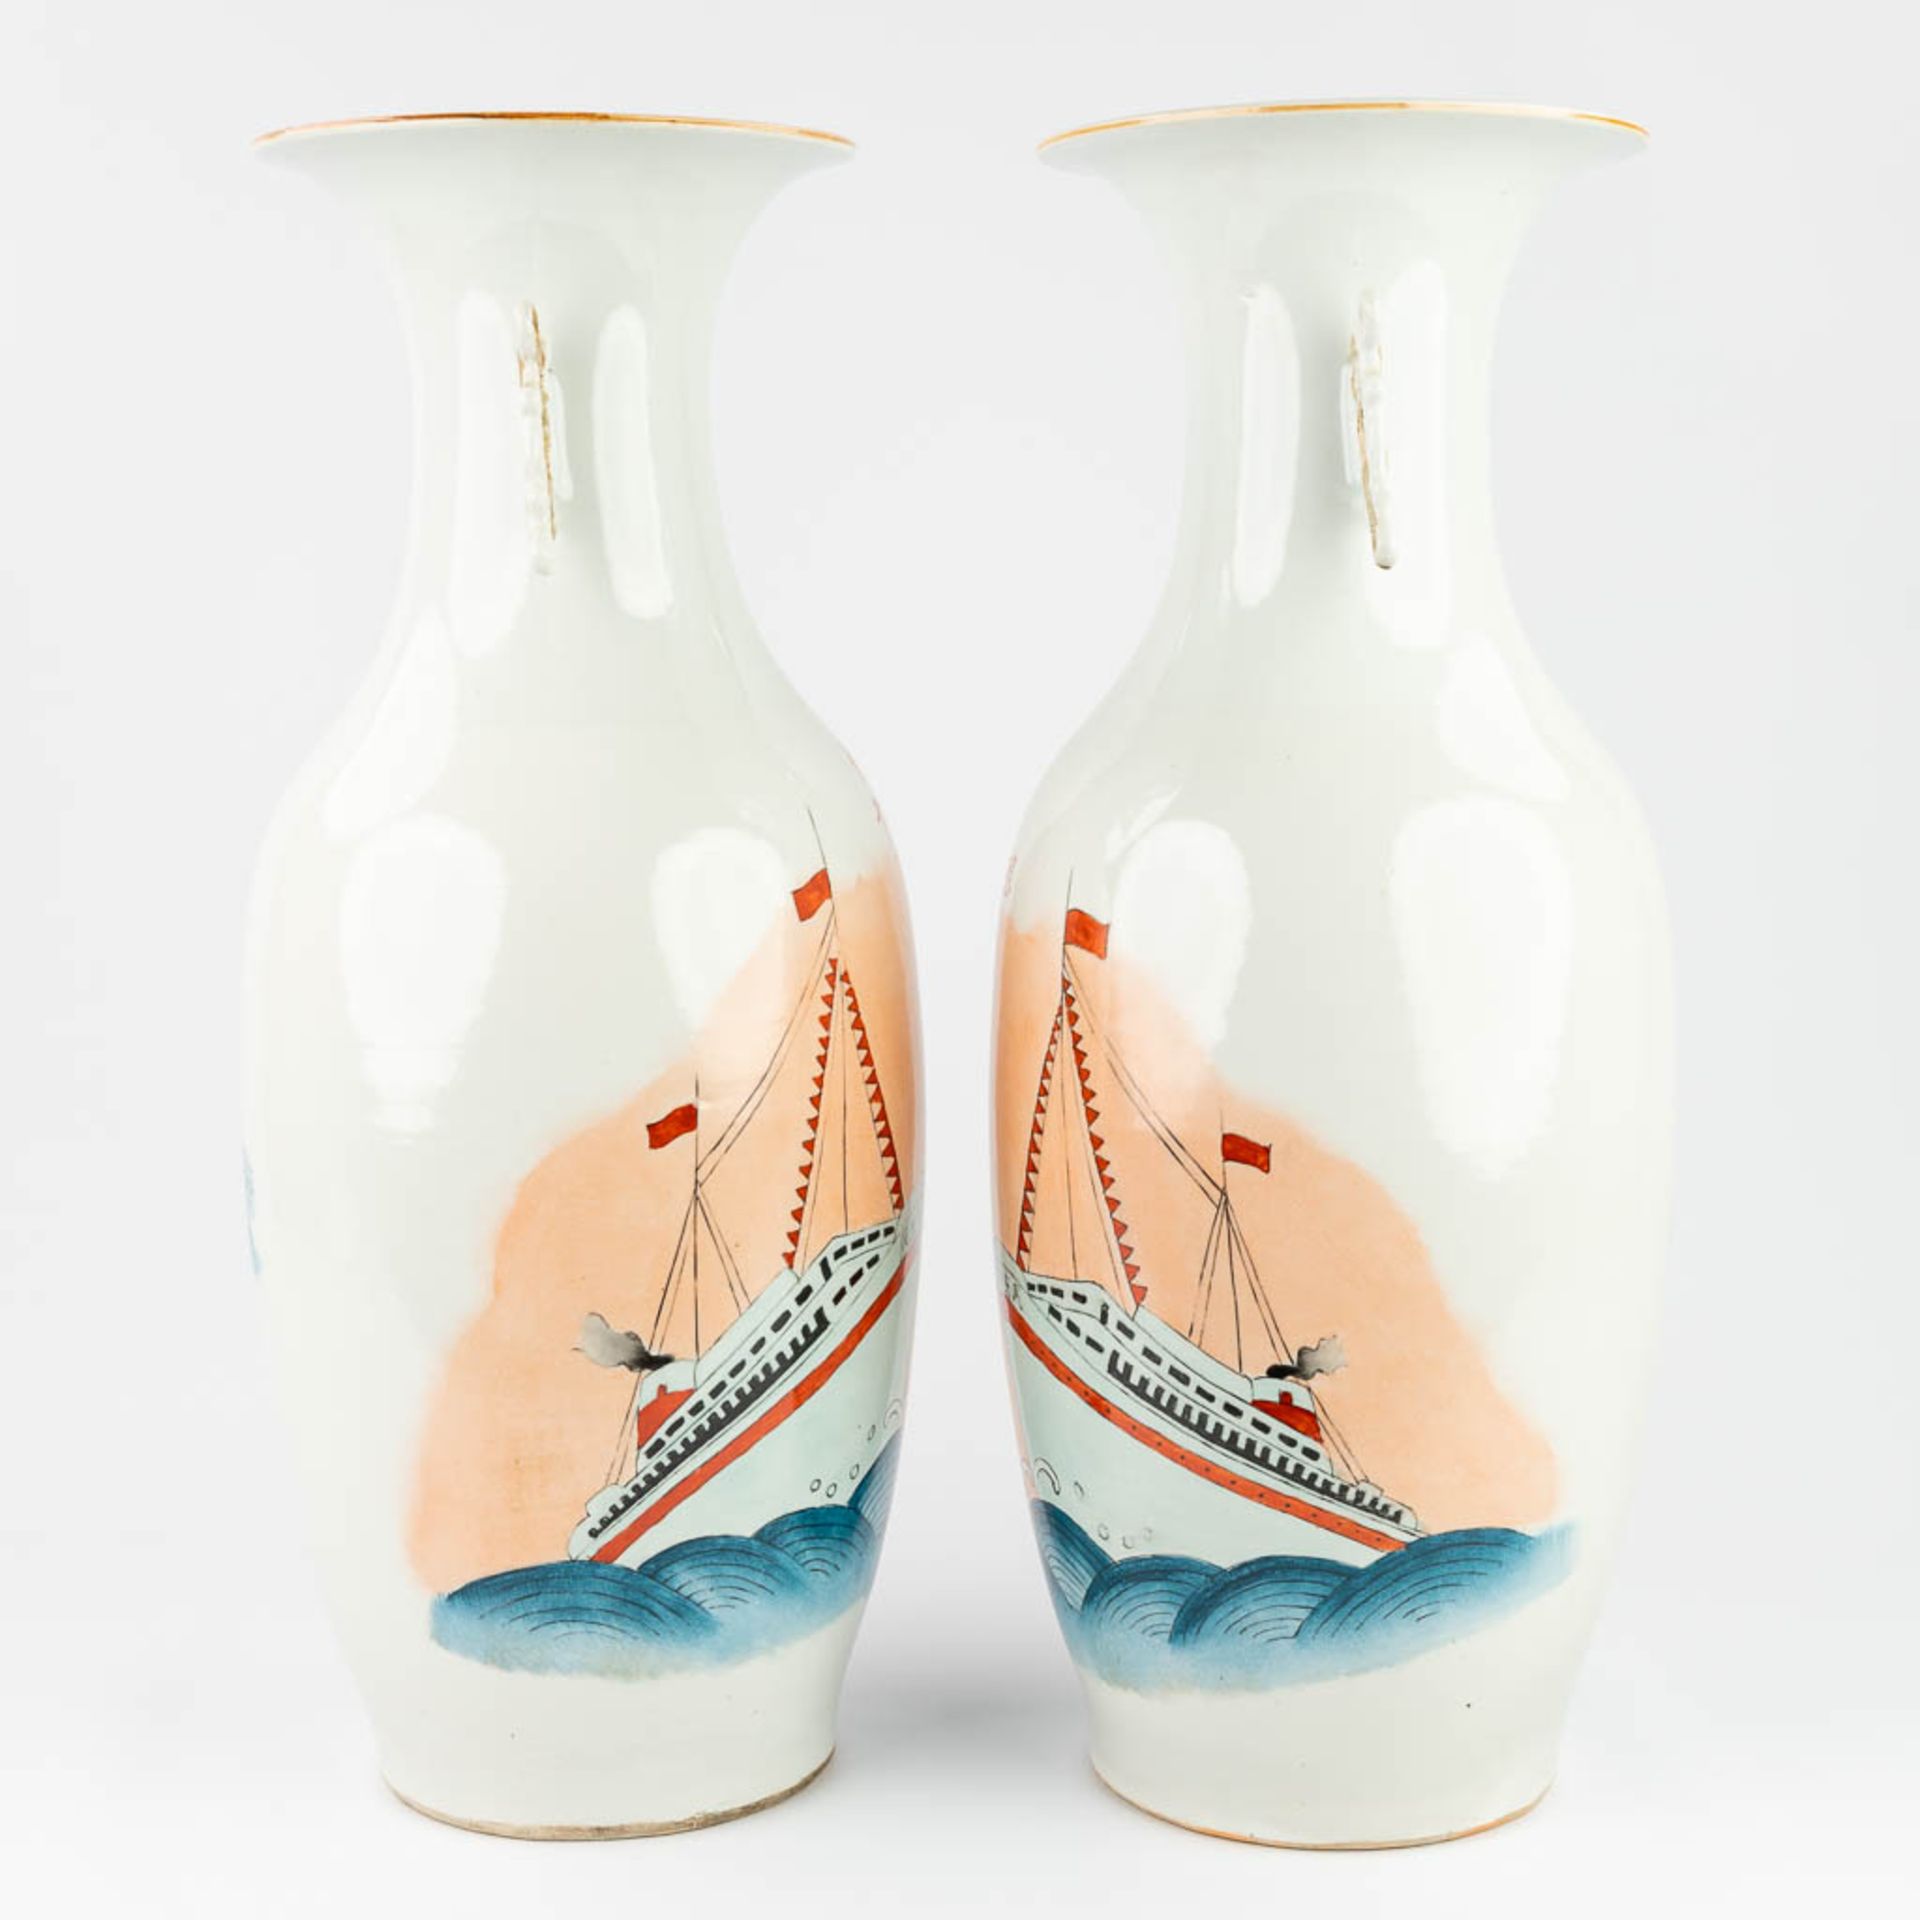 A pair of Chinese vases made of glazed porcelain, and decorated with ships (59,5 x 23 cm) - Image 8 of 14